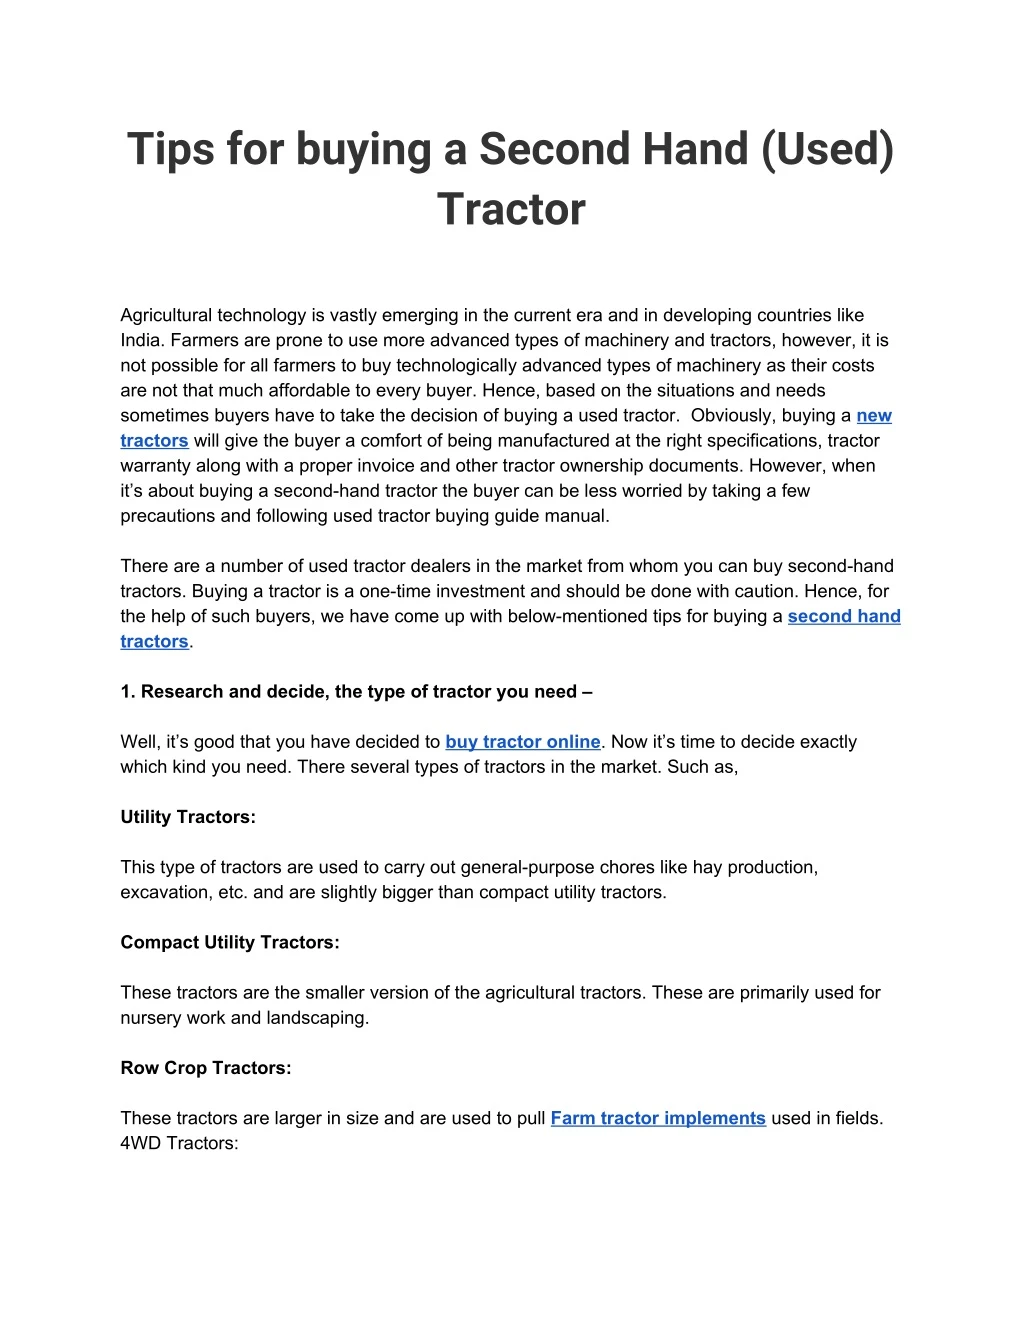 tips for buying a second hand used tractor